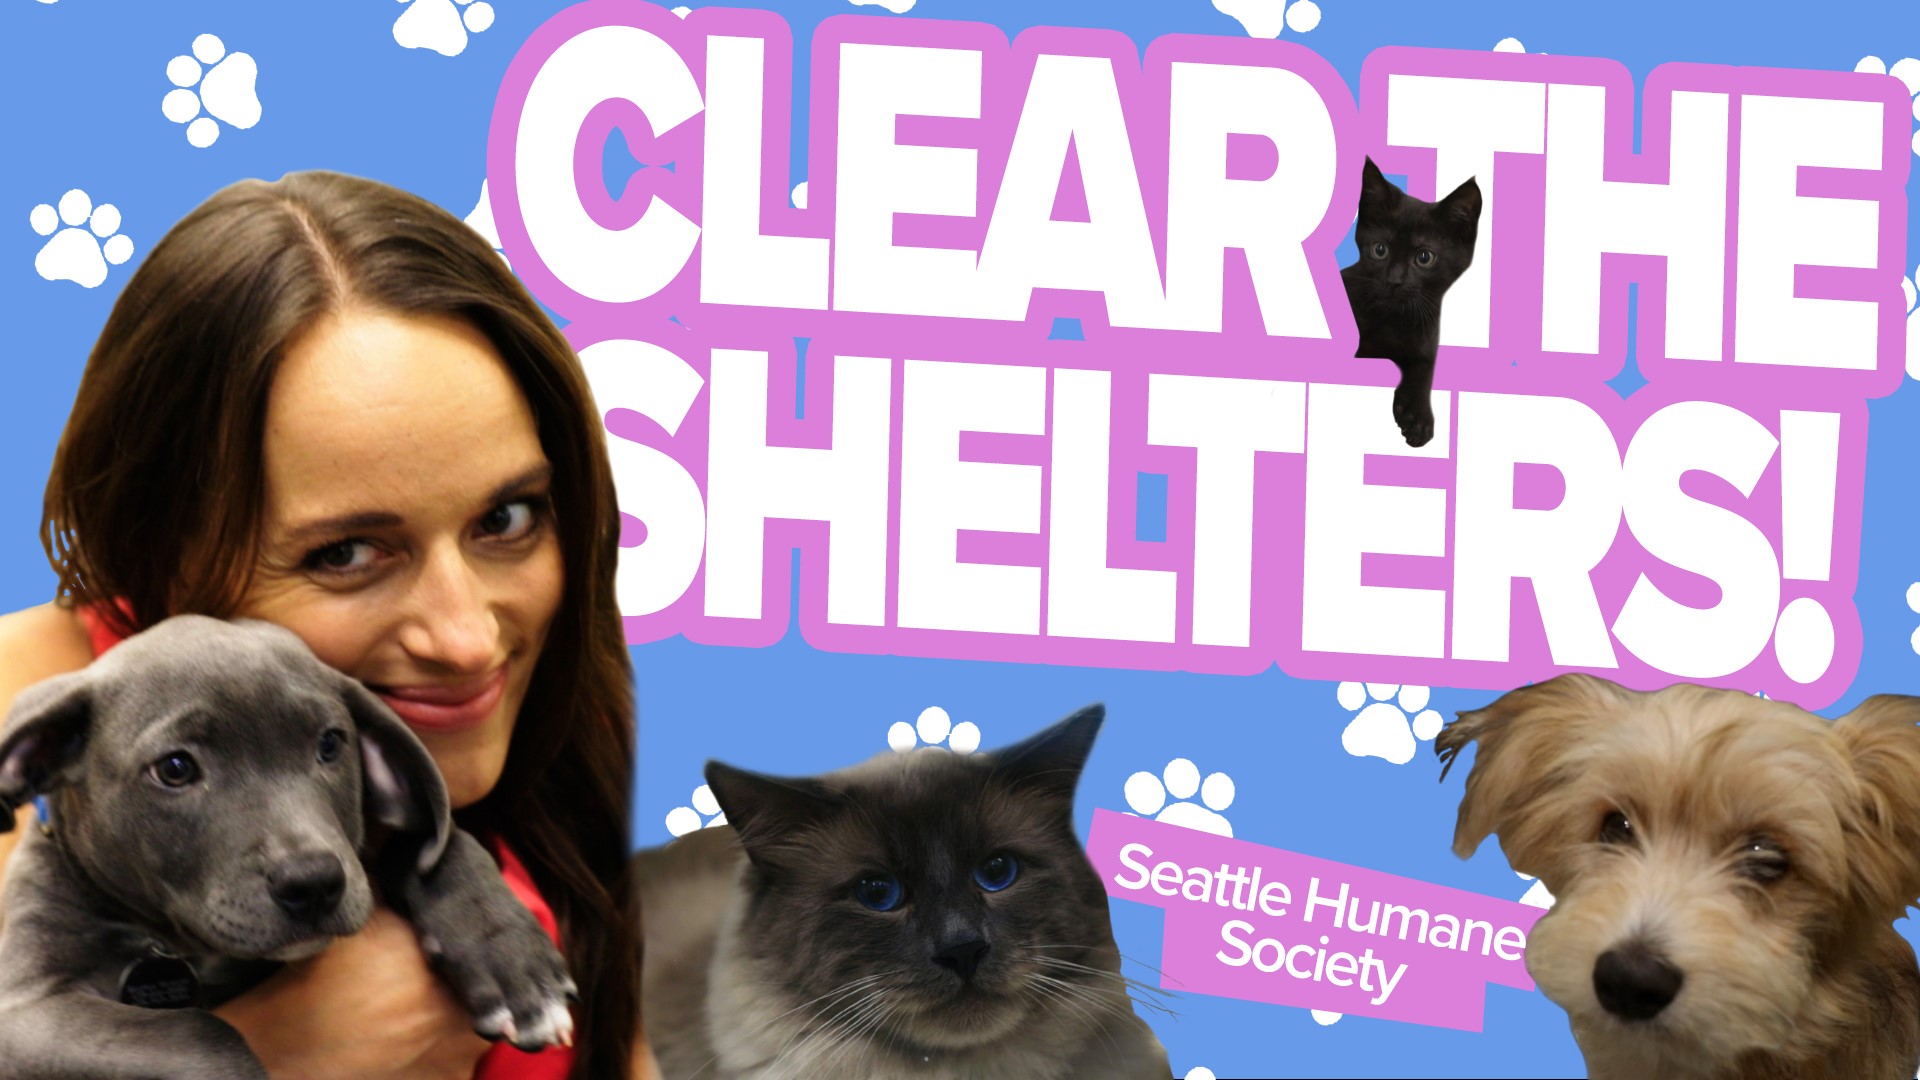 PUPPIES🐕. KITTIES🐈. All the cuteness in today’s video!

I am visiting the Seattle Humane Society for the annual pet adoption drive!